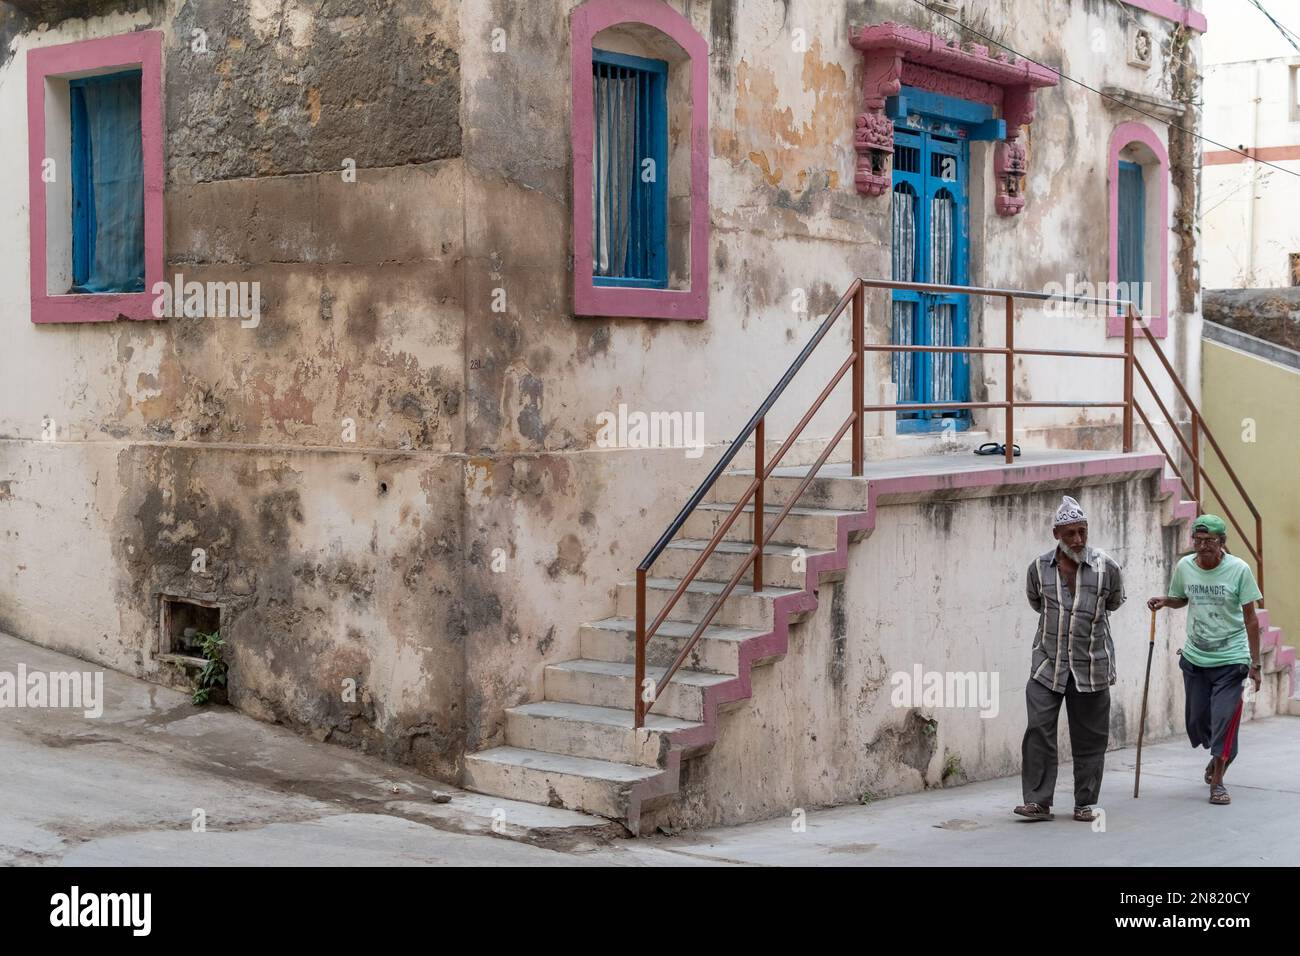 Diu, India - December 2018: Two old men walking past an old Portuguese era house in the streets of Diu. Stock Photo